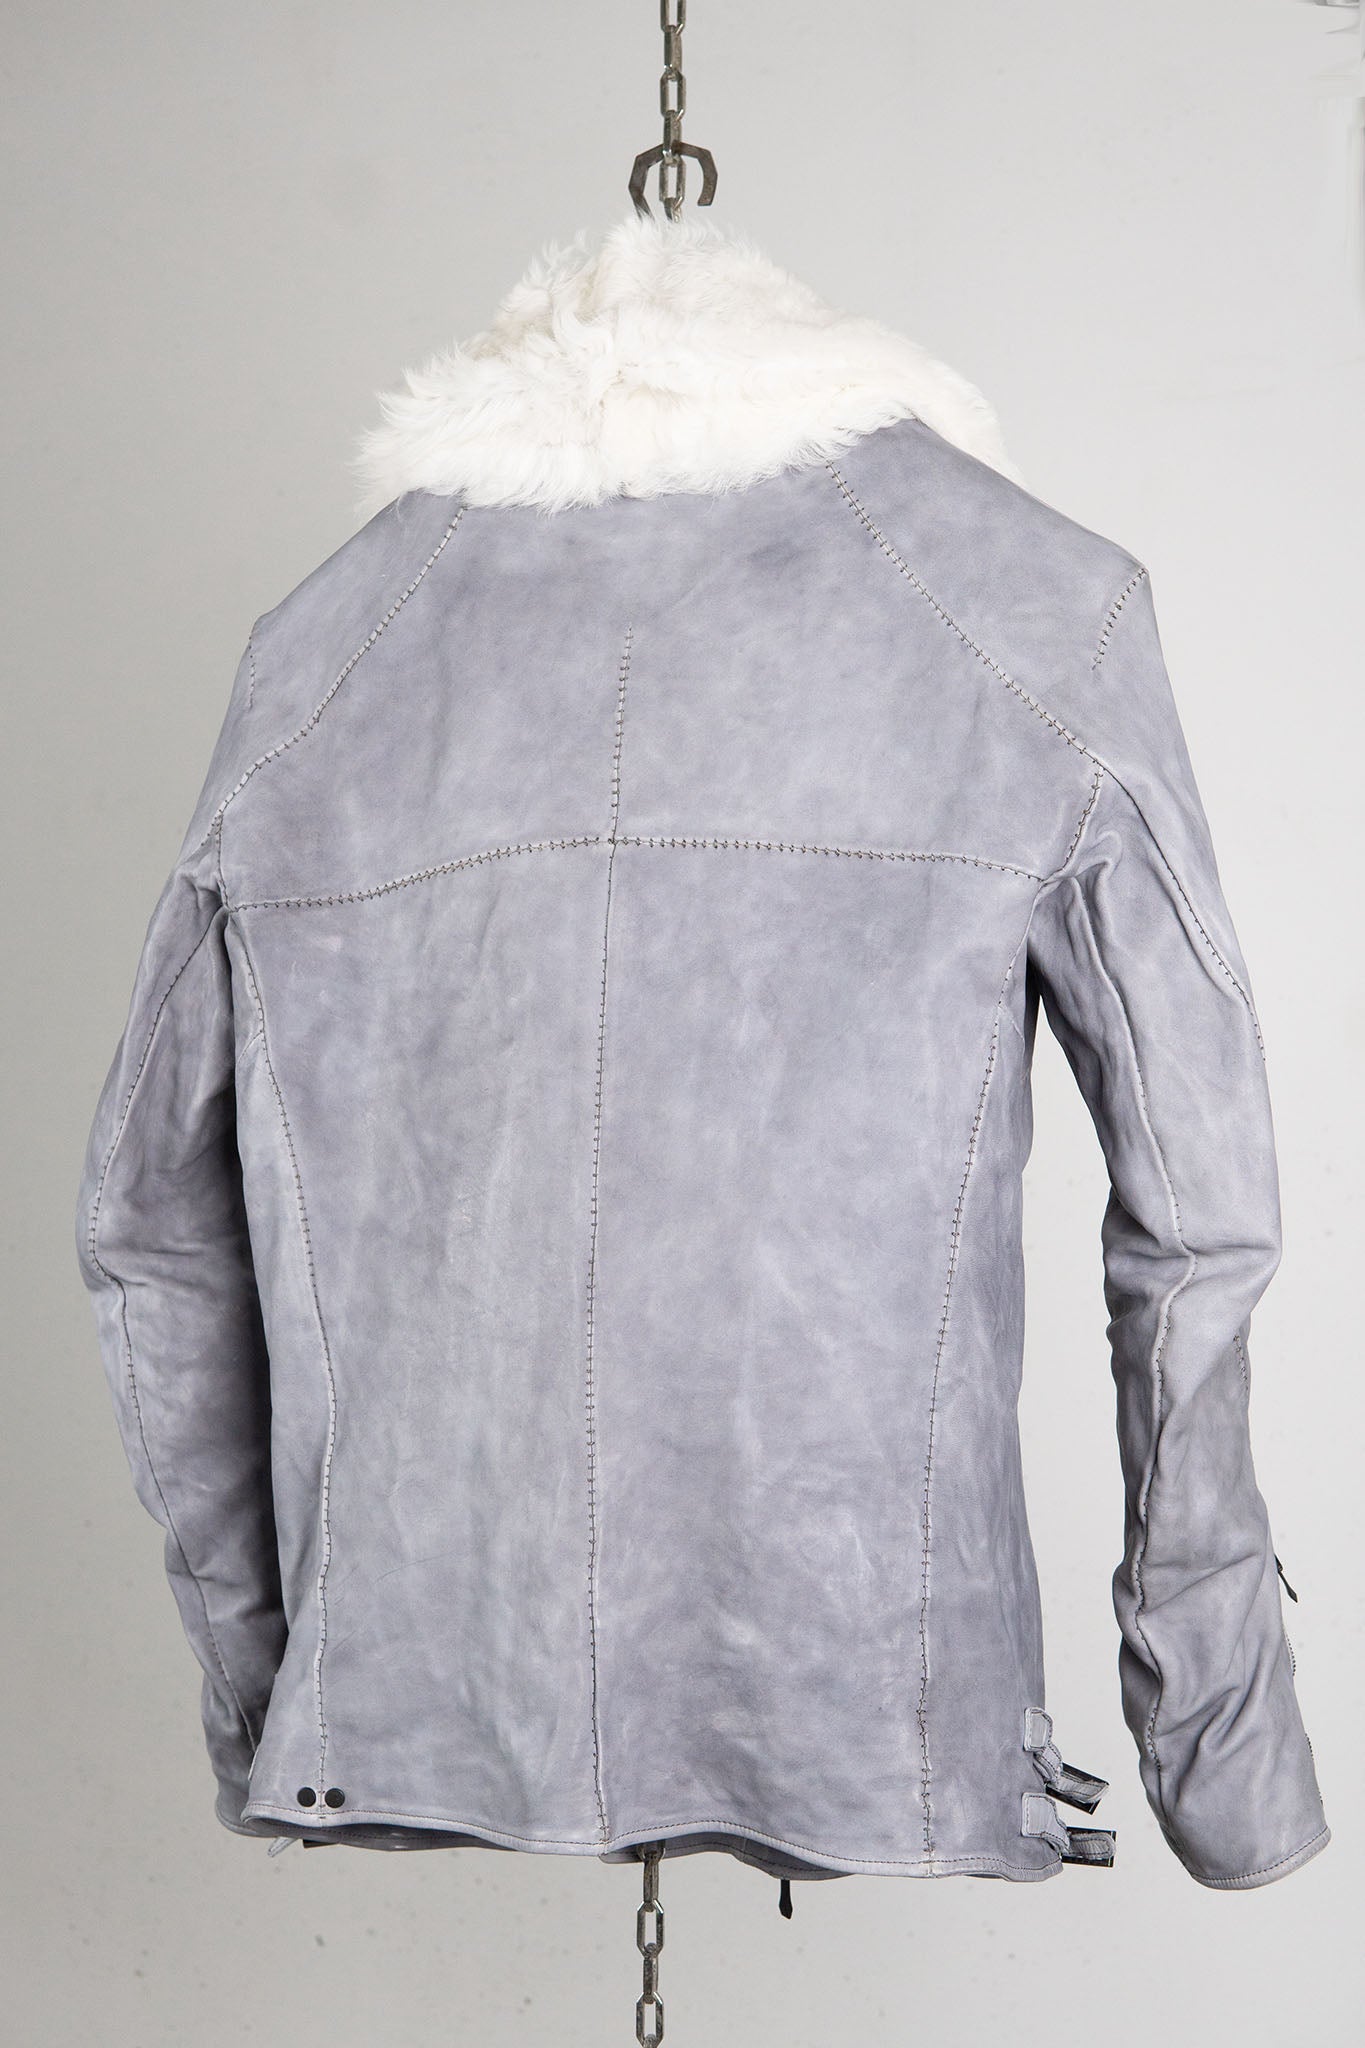 HORSE LEATHER DOUBLE BREAST MOTO LINED MB-2S WITH SHEARLING COLLAR